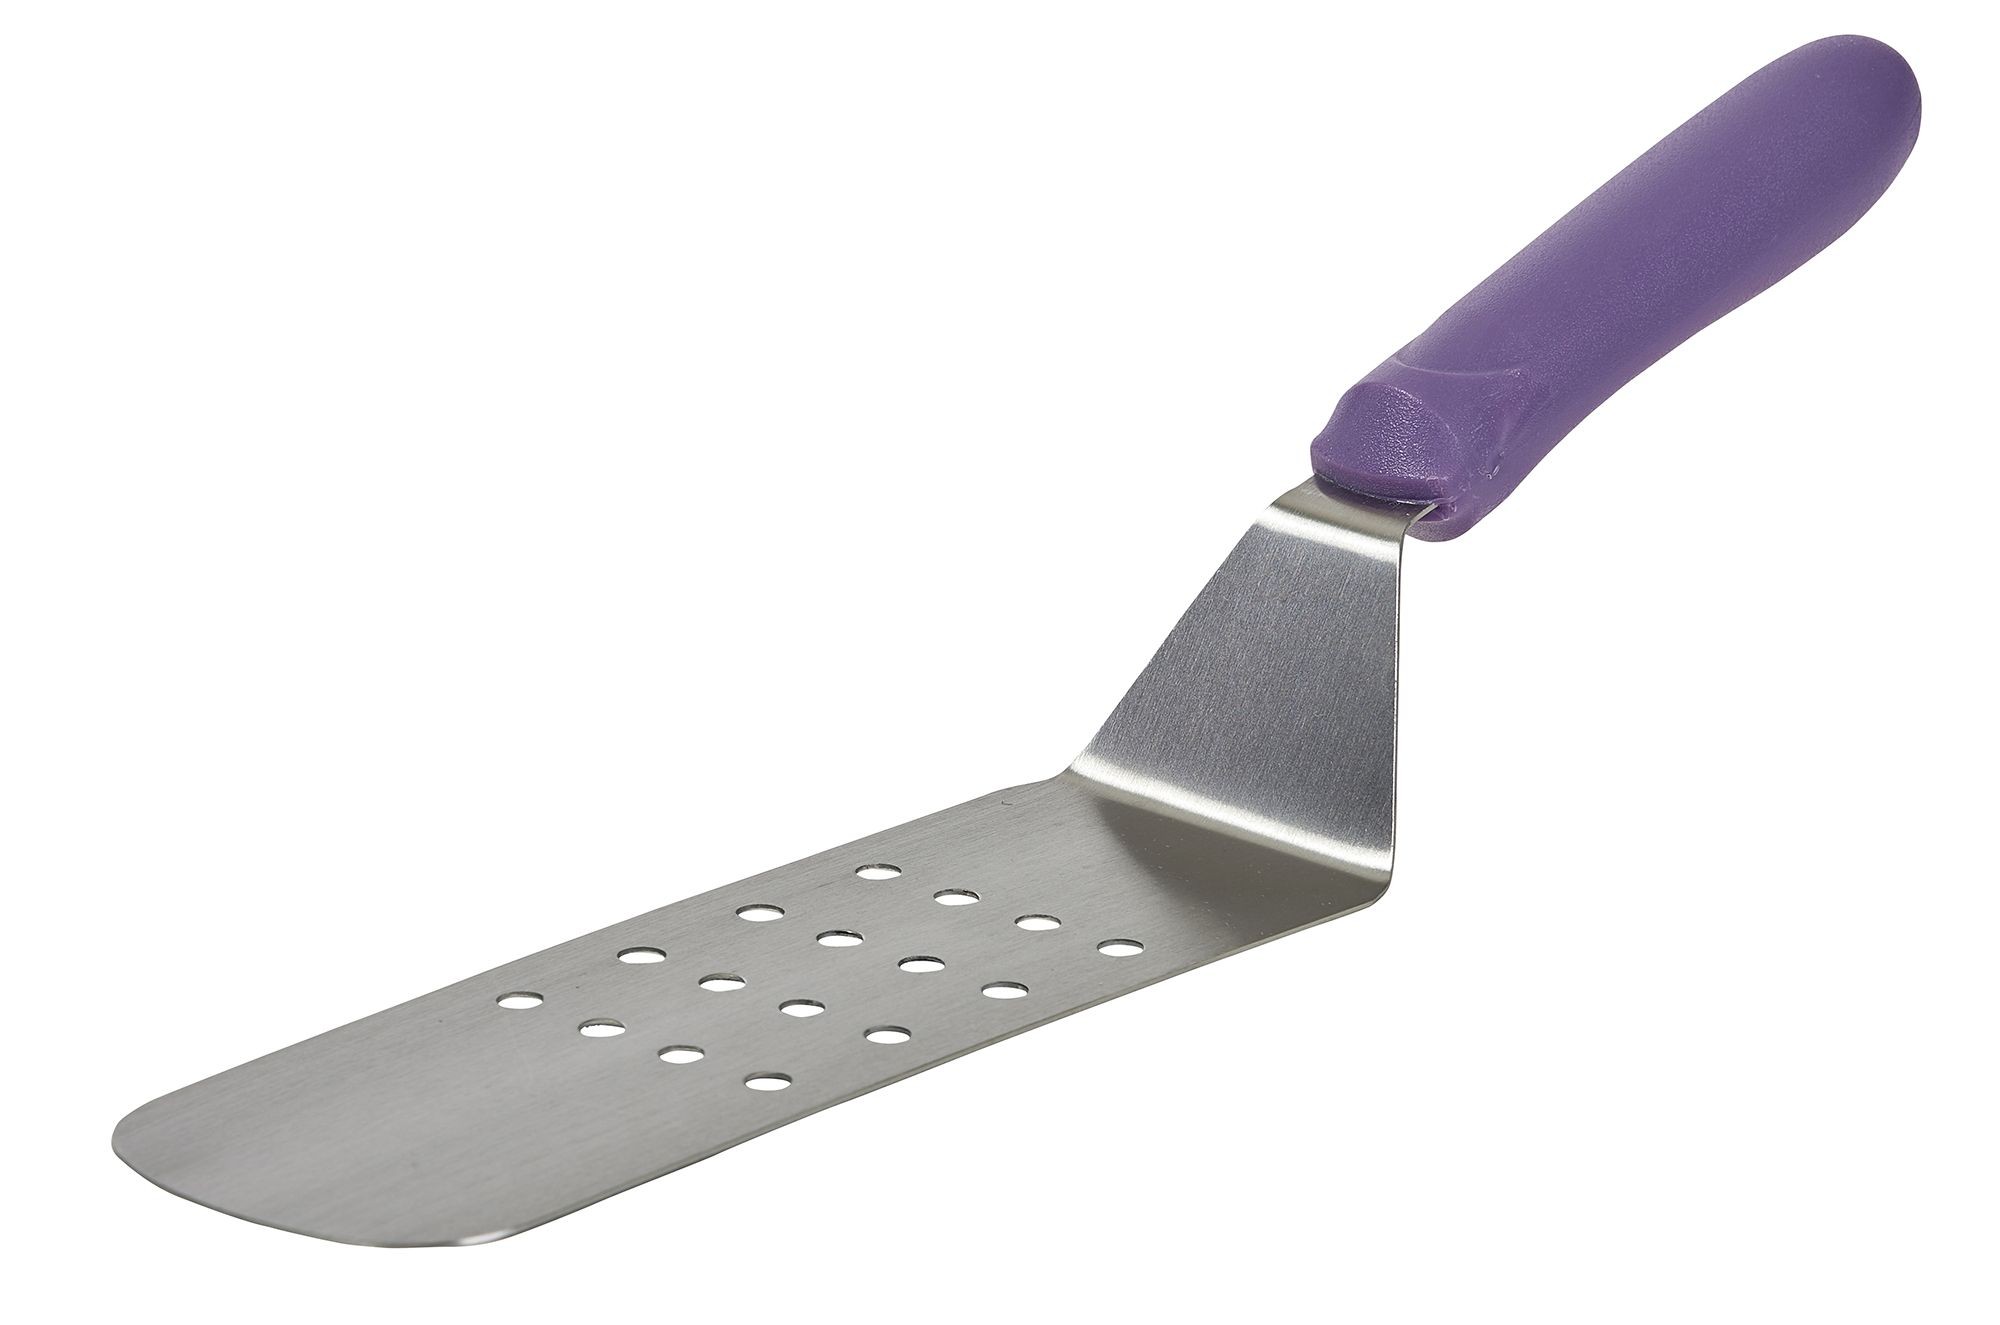 Winco TWP-91P Stainless Steel Allergen Free Perforated Flexible Offset Turner with Purple Handle 8-1/4" x 2-7/8"